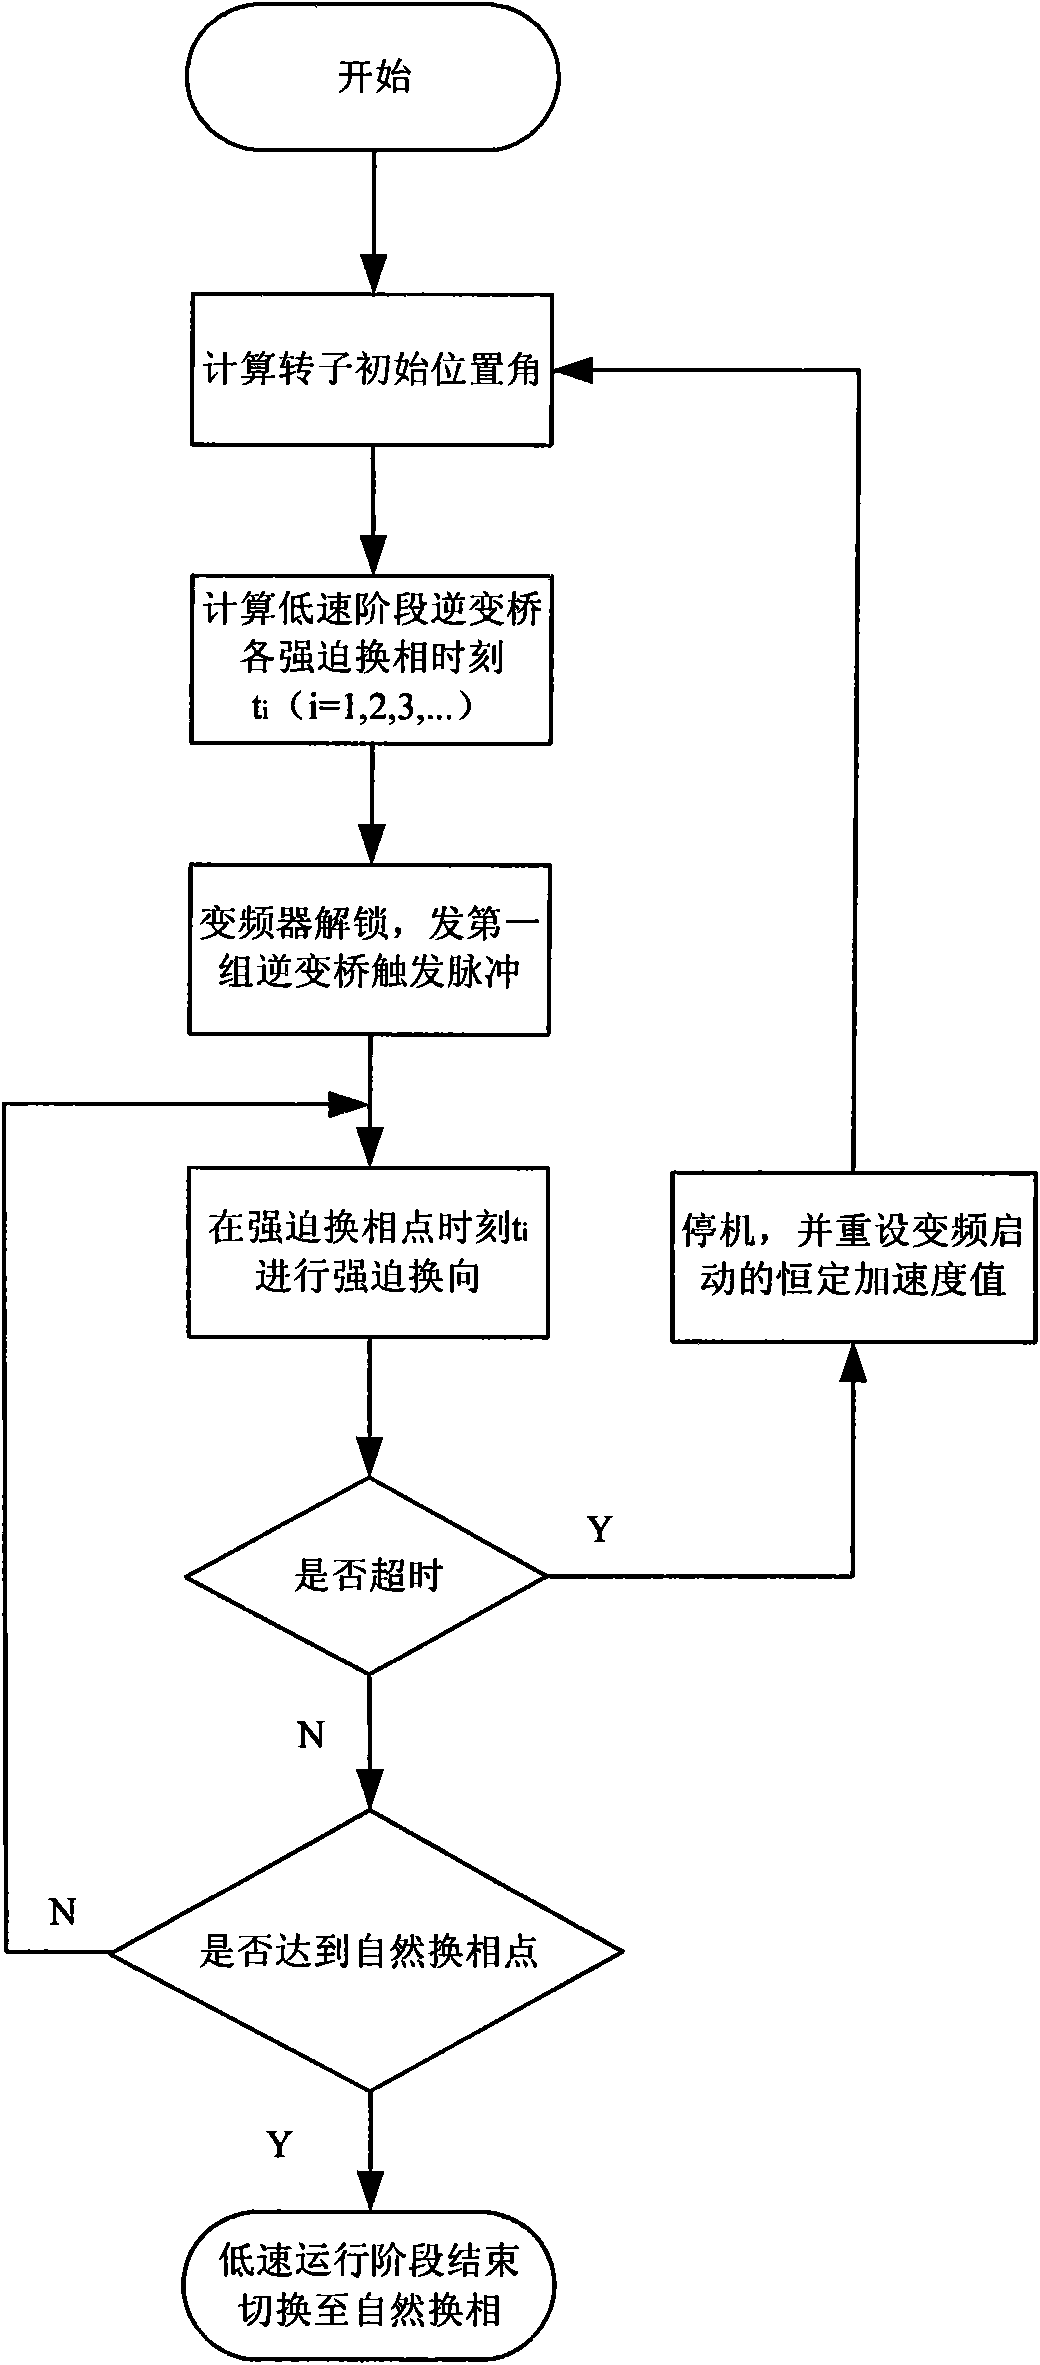 Control method of low-speed stage starting of static frequency conversion starting of pumped storage power station